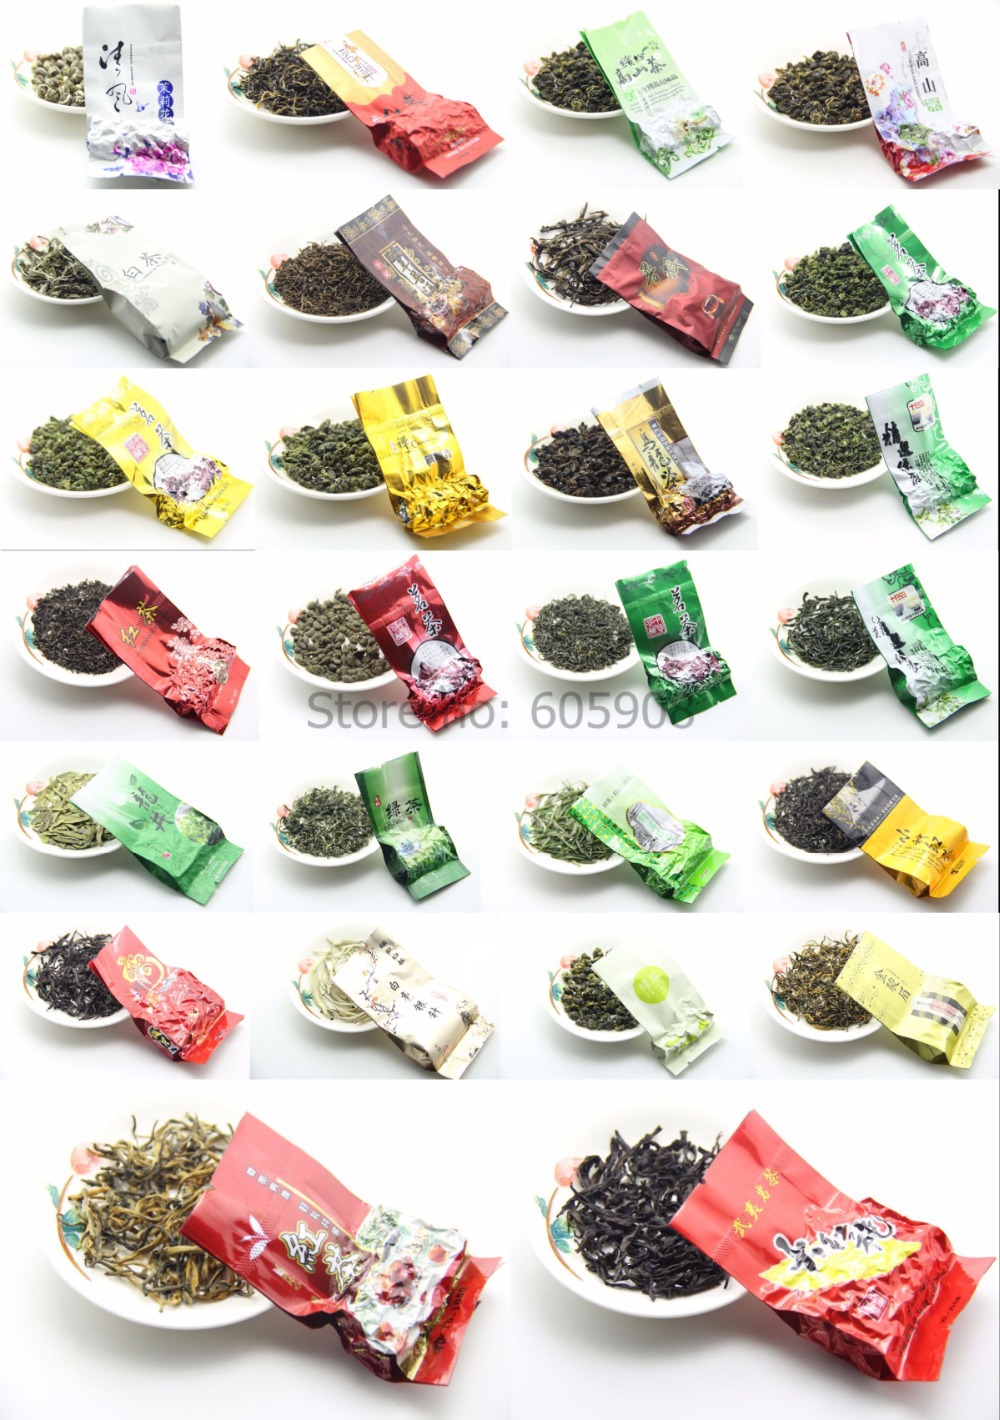 26 Tpyes Assorted Famous High Quality Chinese Tea